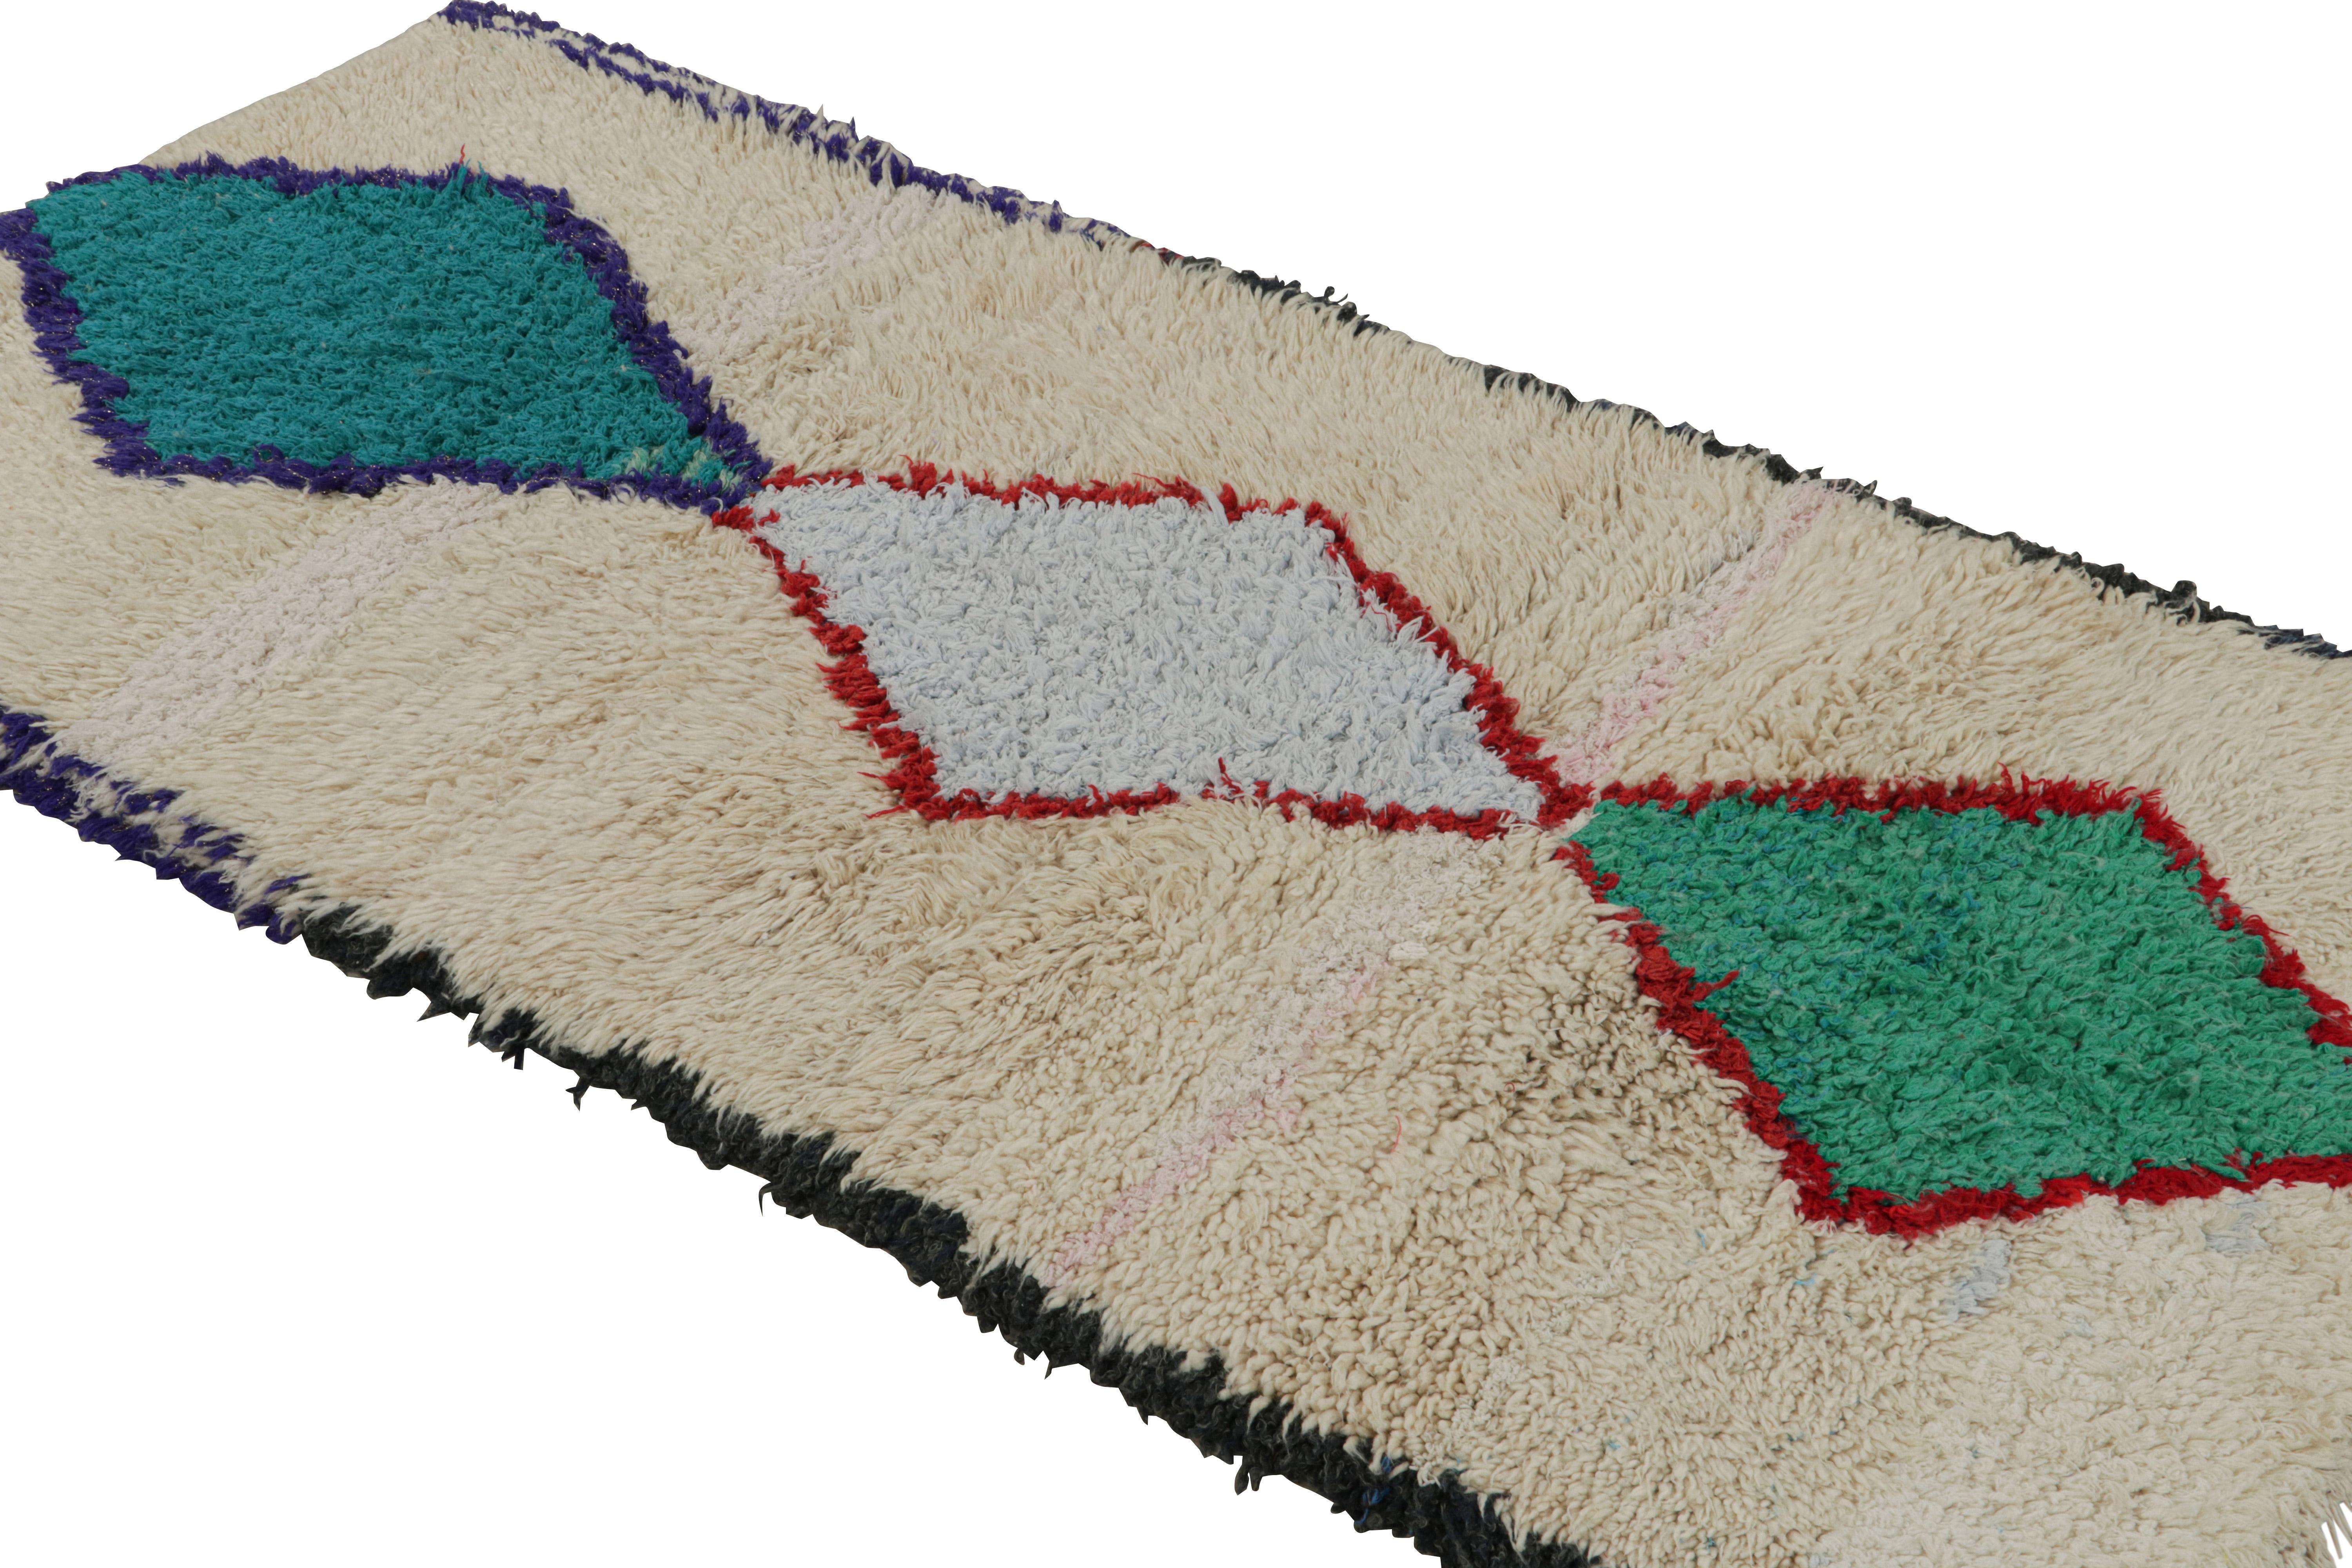 Hand-knotted in wool and cotton circa 1950-1960, this vintage 3x6 Moroccan runner rug is believed to hail from the Azilal tribe. 

On the Design: 

This runner enjoys blue-red and green diamond patterns on a beige background. Keen eyes will further